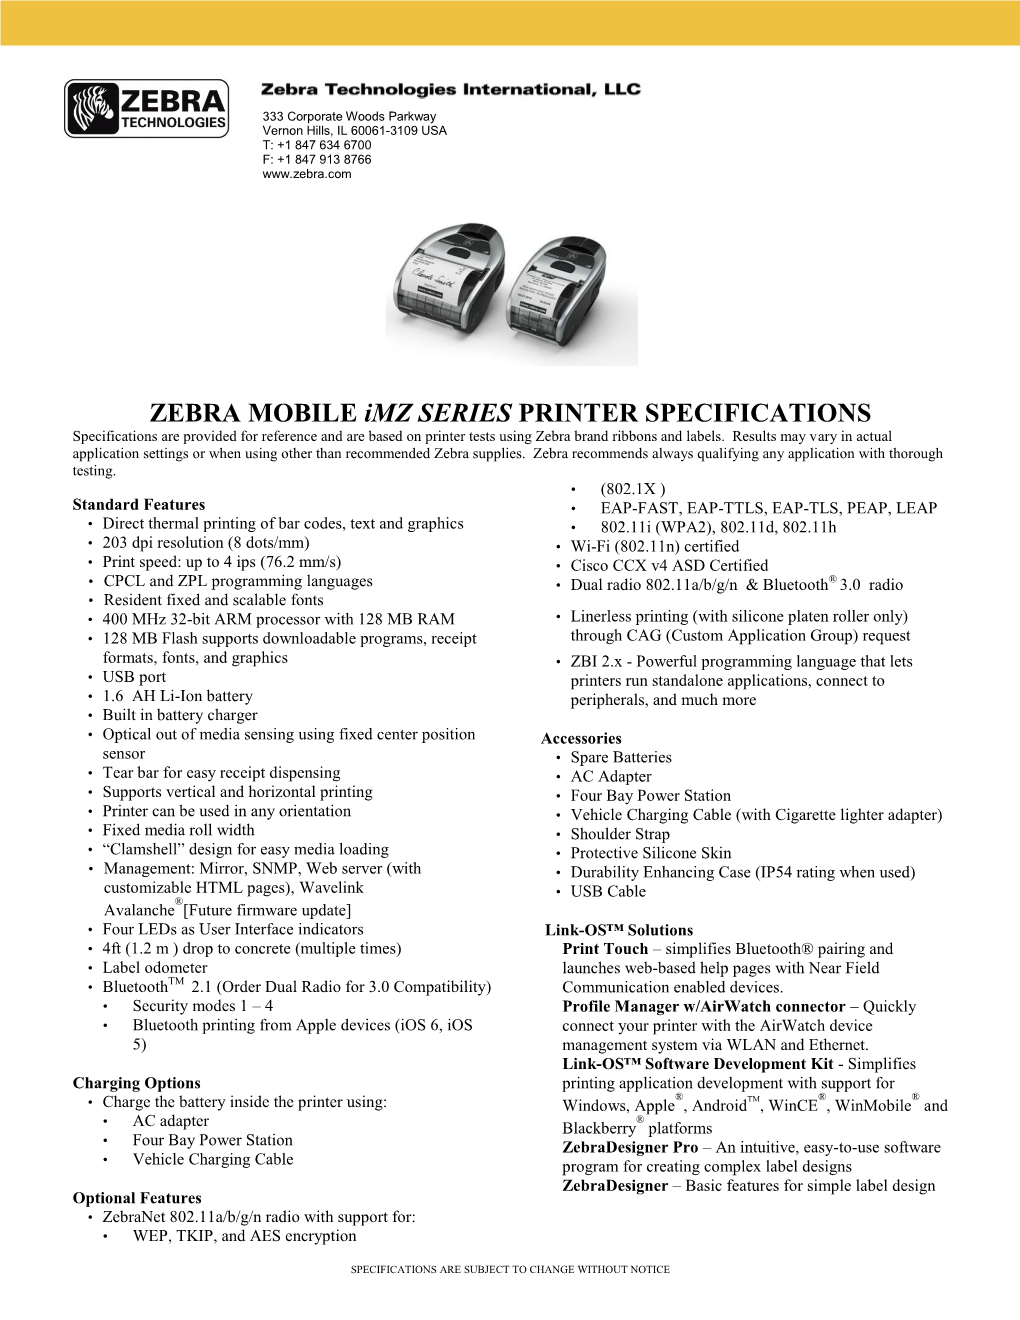 ZEBRA MOBILE Imz SERIES PRINTER SPECIFICATIONS Specifications Are Provided for Reference and Are Based on Printer Tests Using Zebra Brand Ribbons and Labels